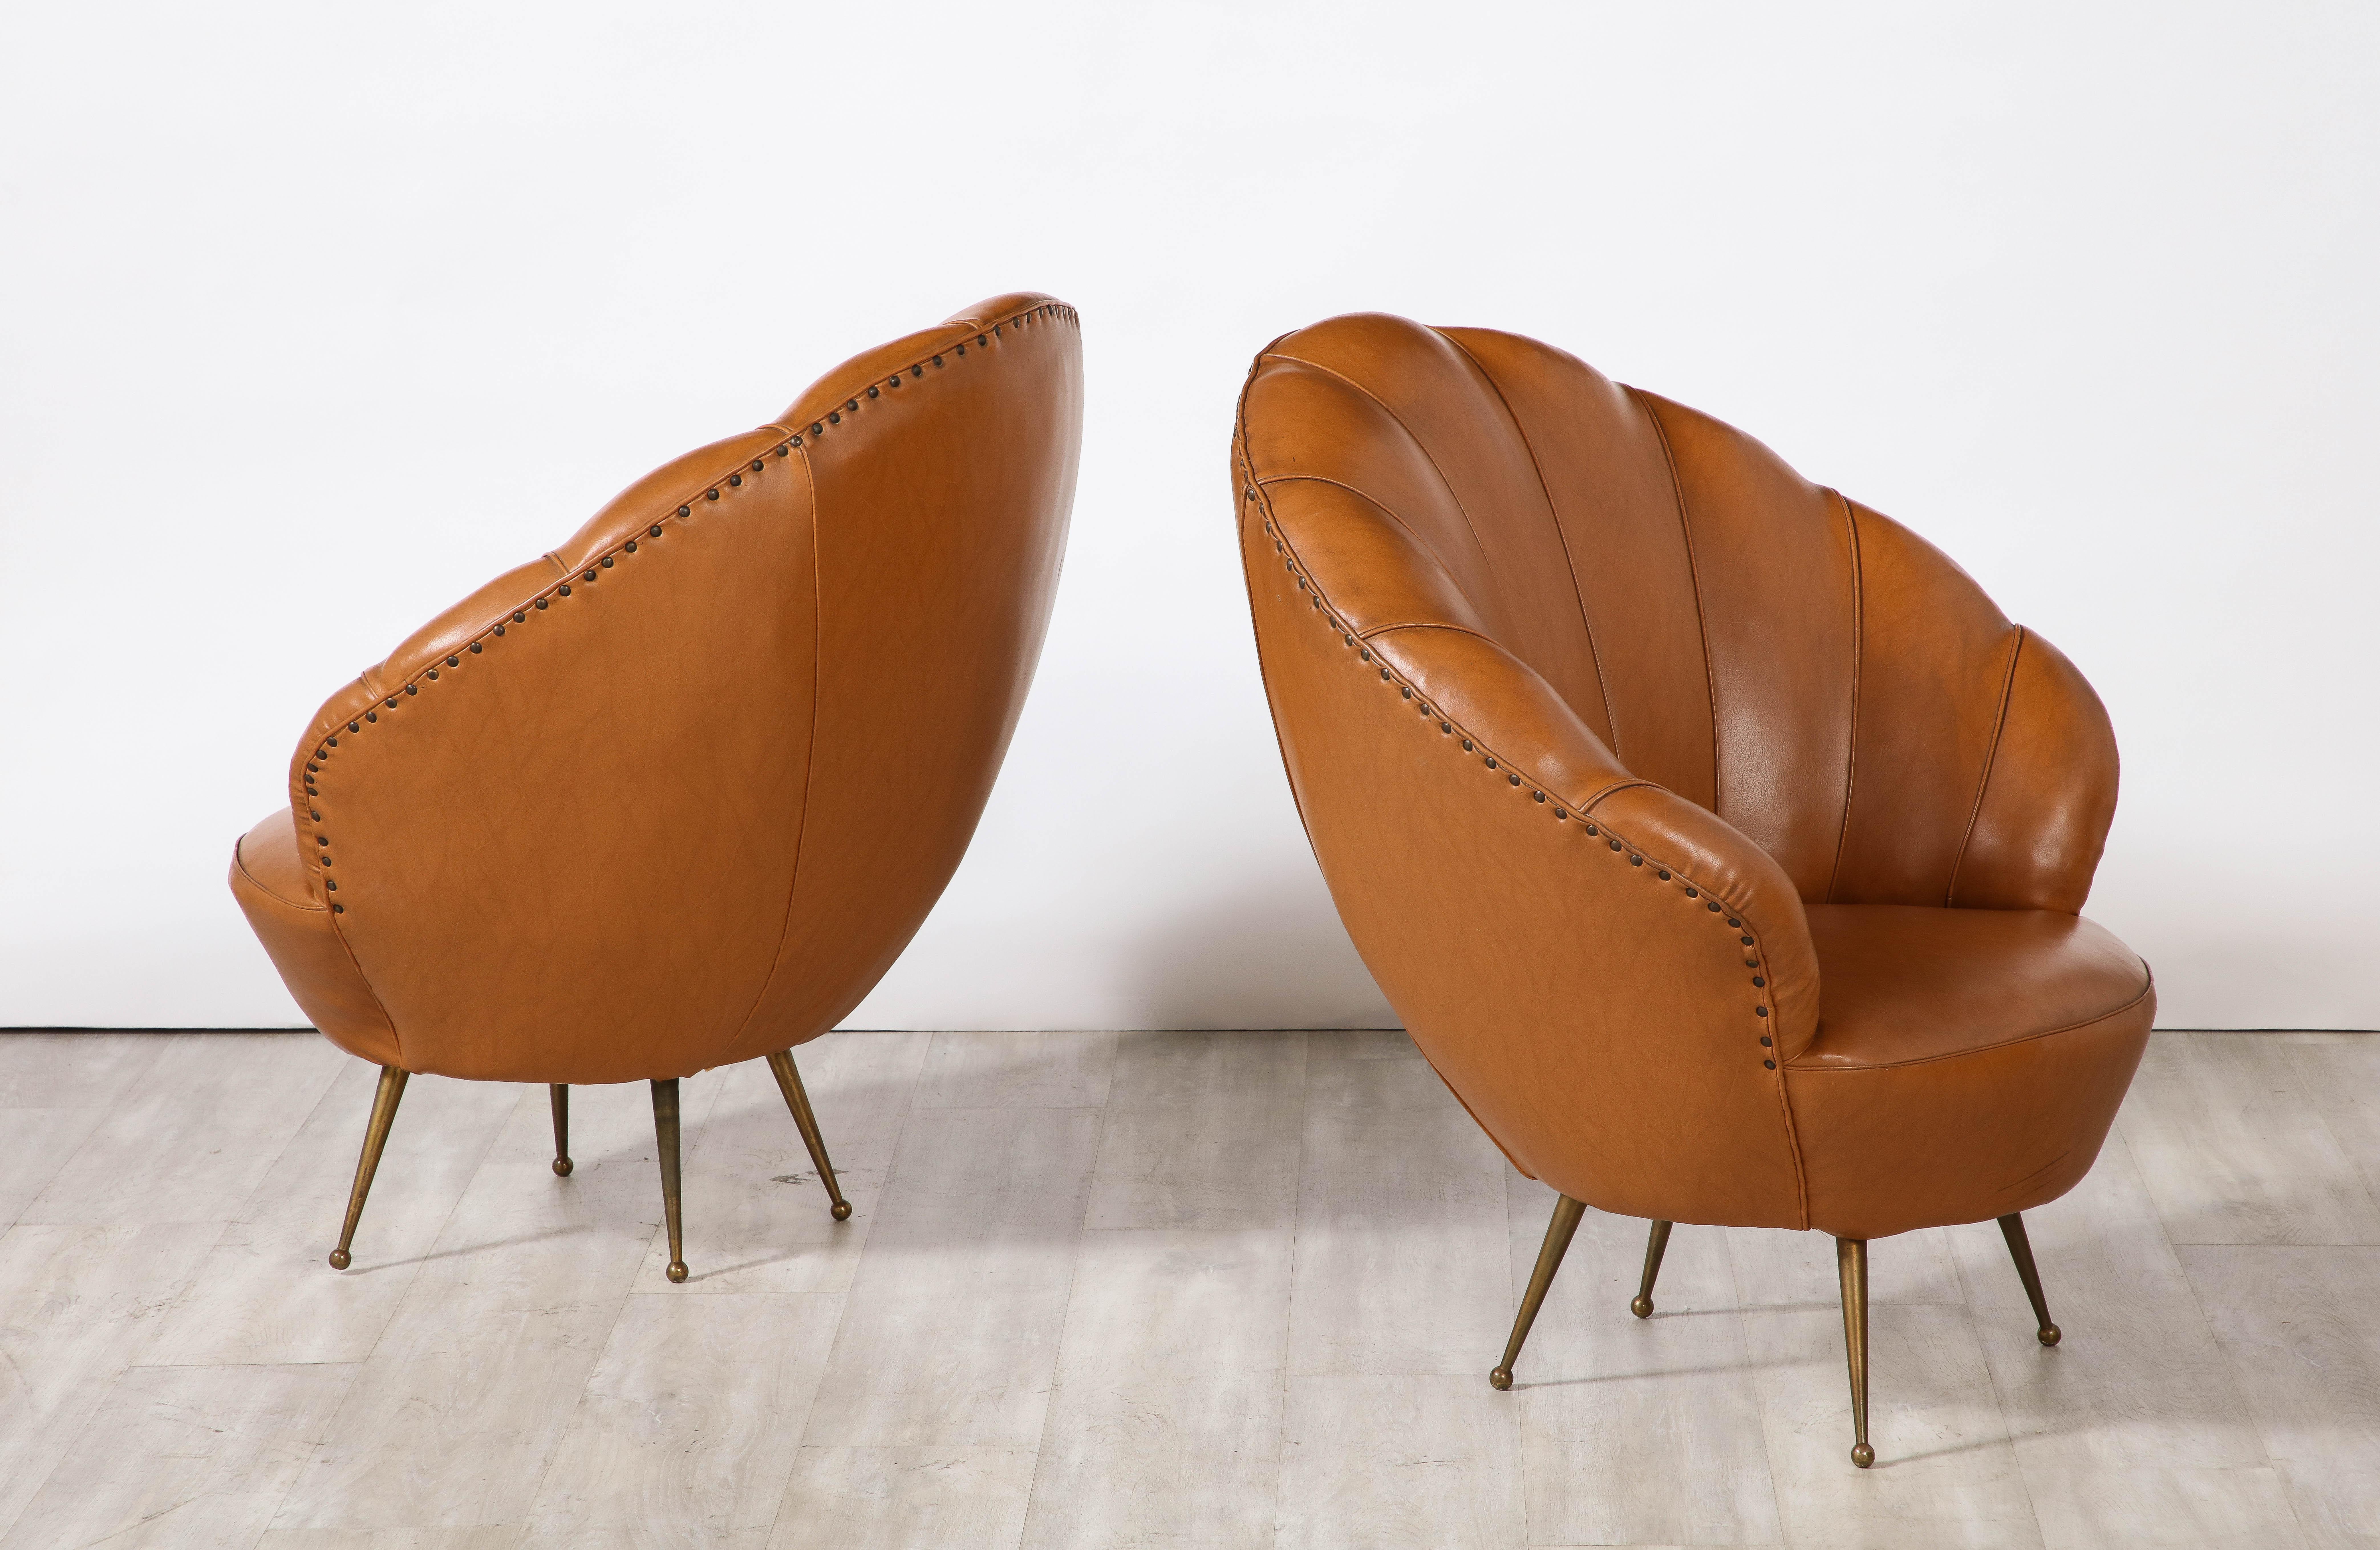 Pair of Italian Modernist Leather Scalloped Lounge Chairs, Circa 1950  For Sale 1